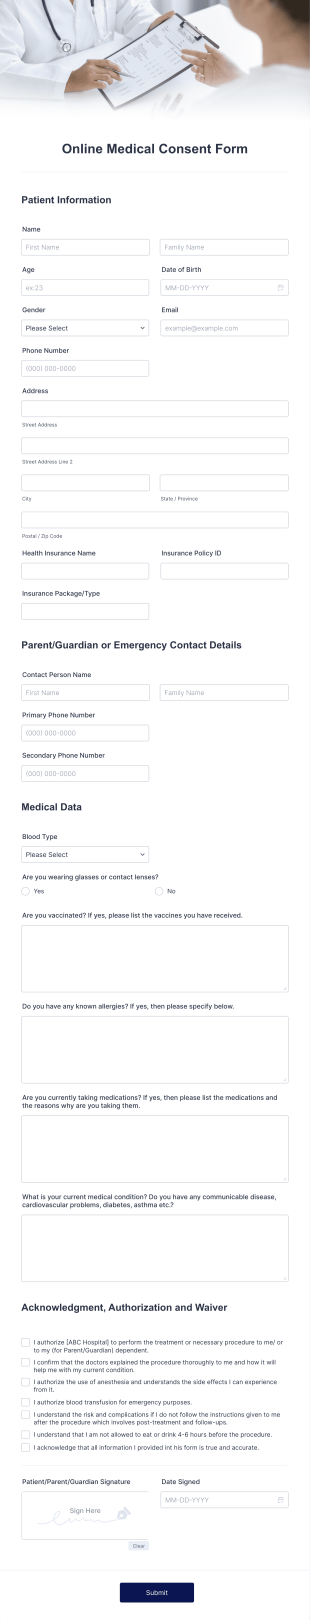 Online Medical Consent Form Template